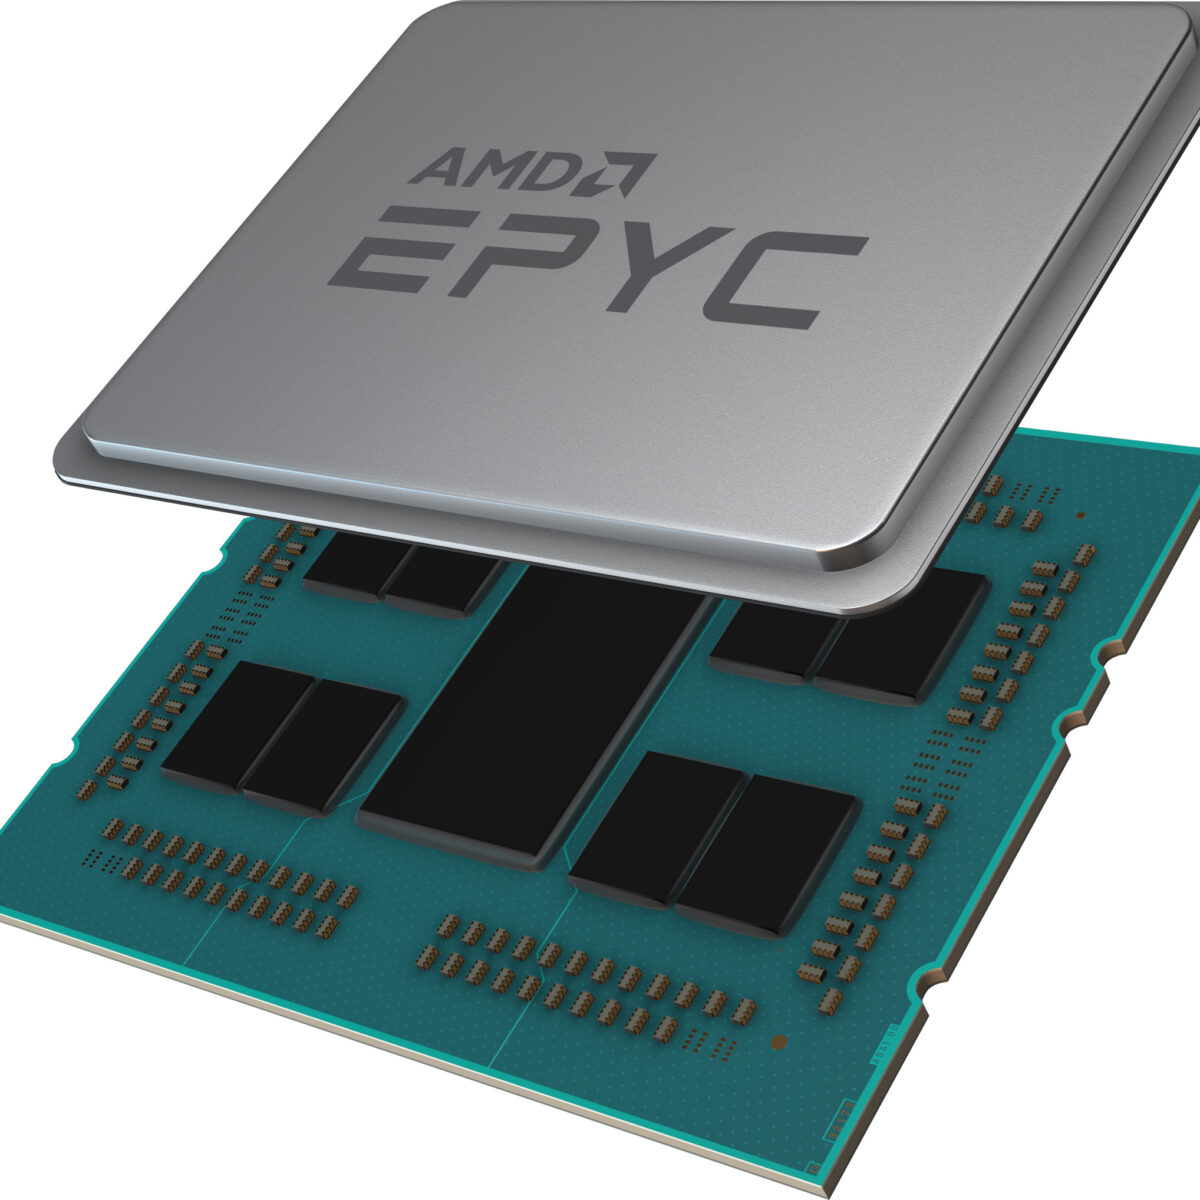 From Naples To Rome: AMD's 2nd EPYC Win Against Intel – Techgage